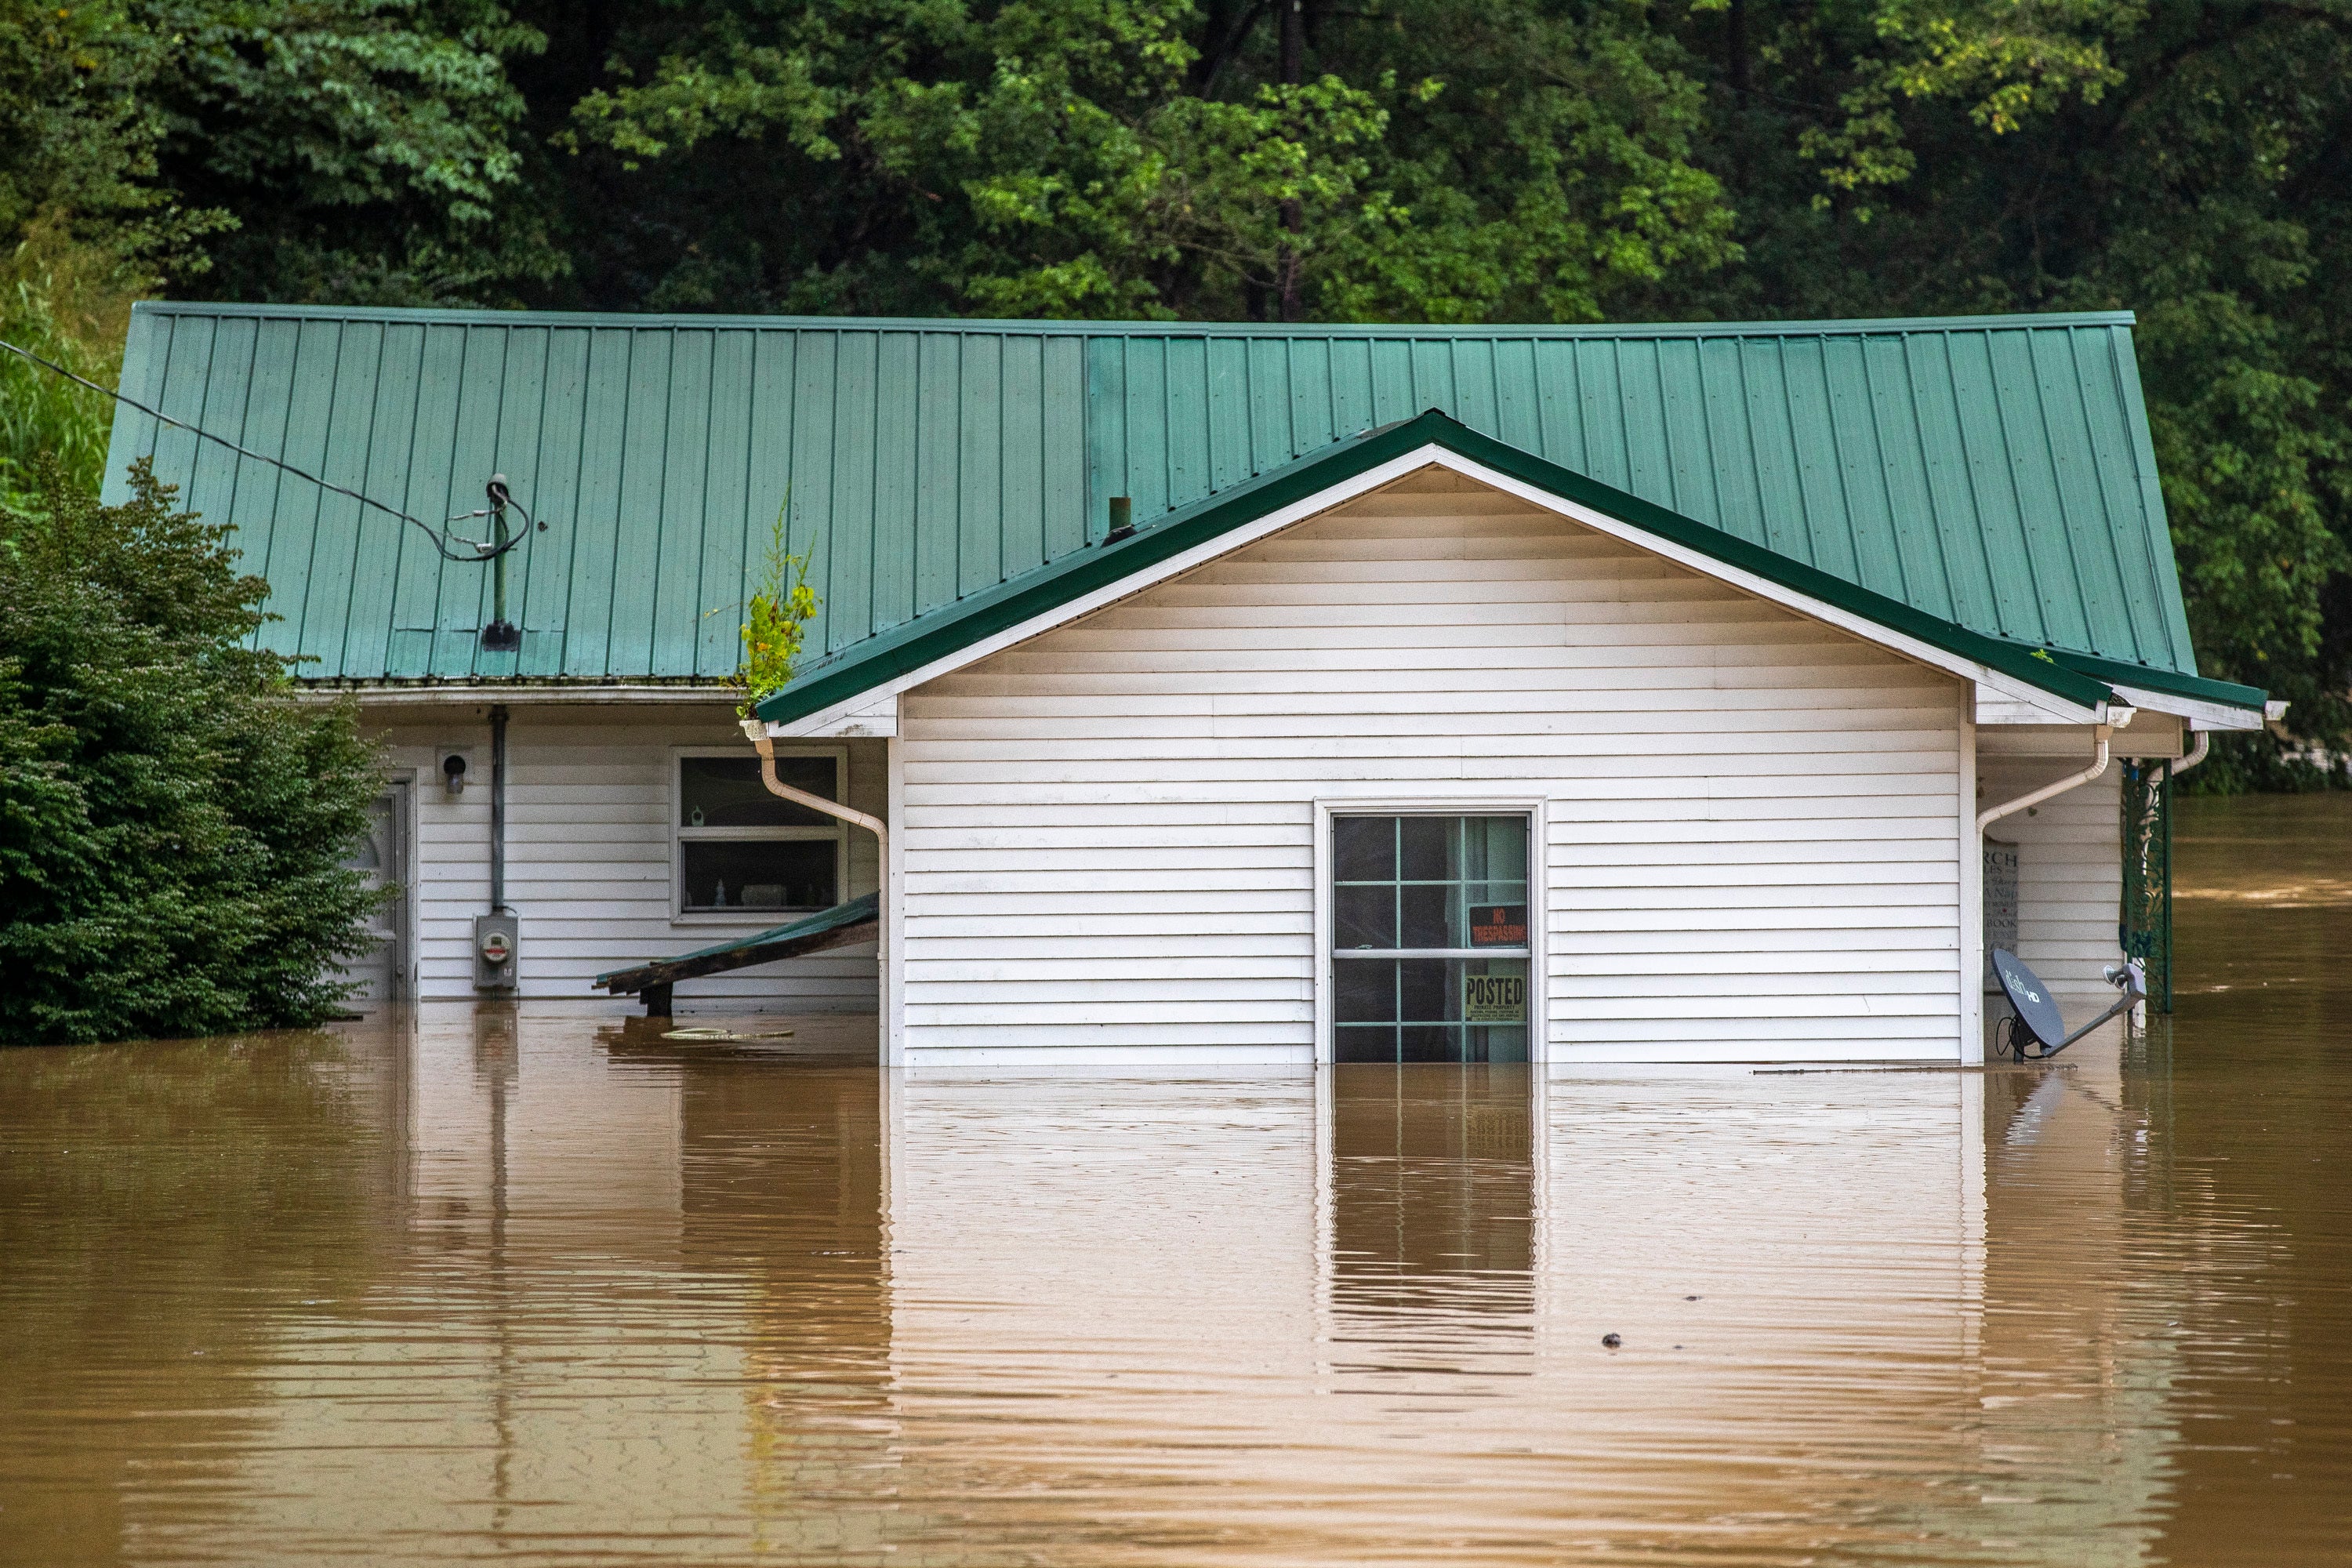 Homes are flooded by Lost Creek, Ky., on Thursday, July 28, 2022. (Photo: Ryan C. Hermens/Lexington Herald-Leader, AP)